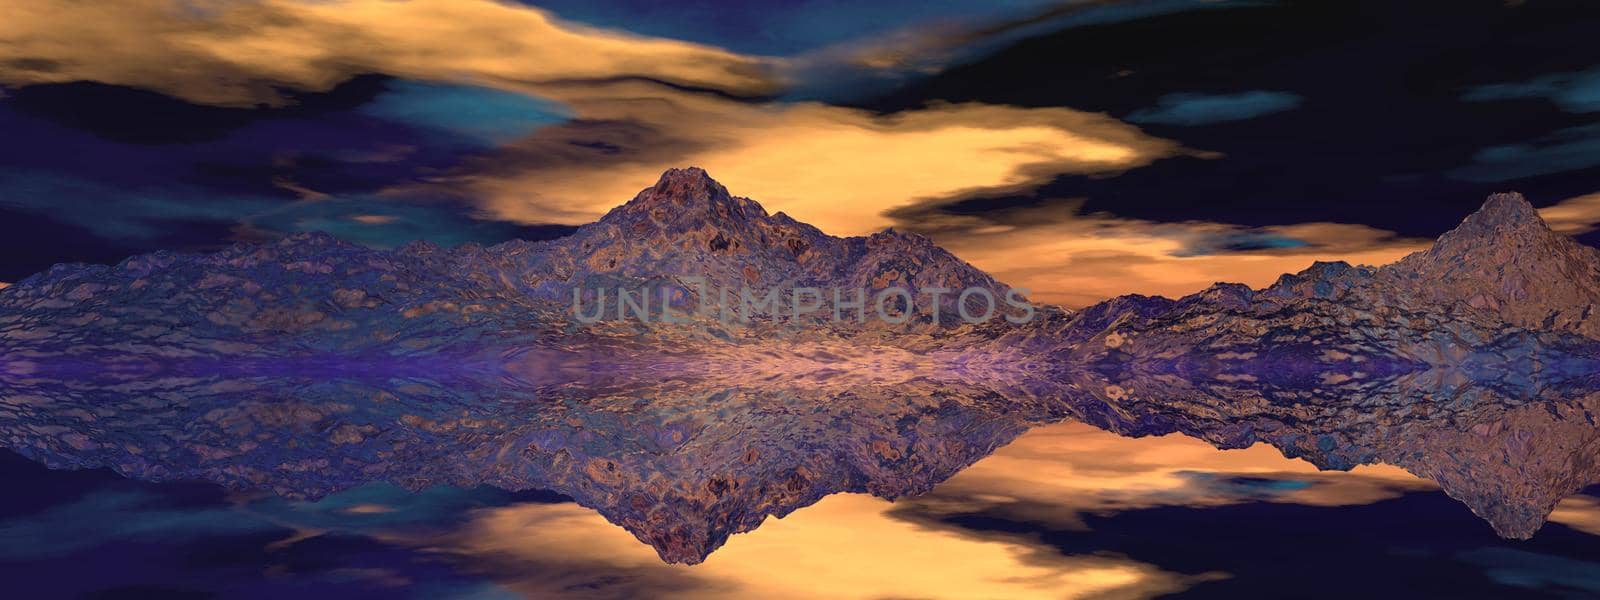 beautiful view of a mountain mirrored on a lake - 3d rendering by mariephotos